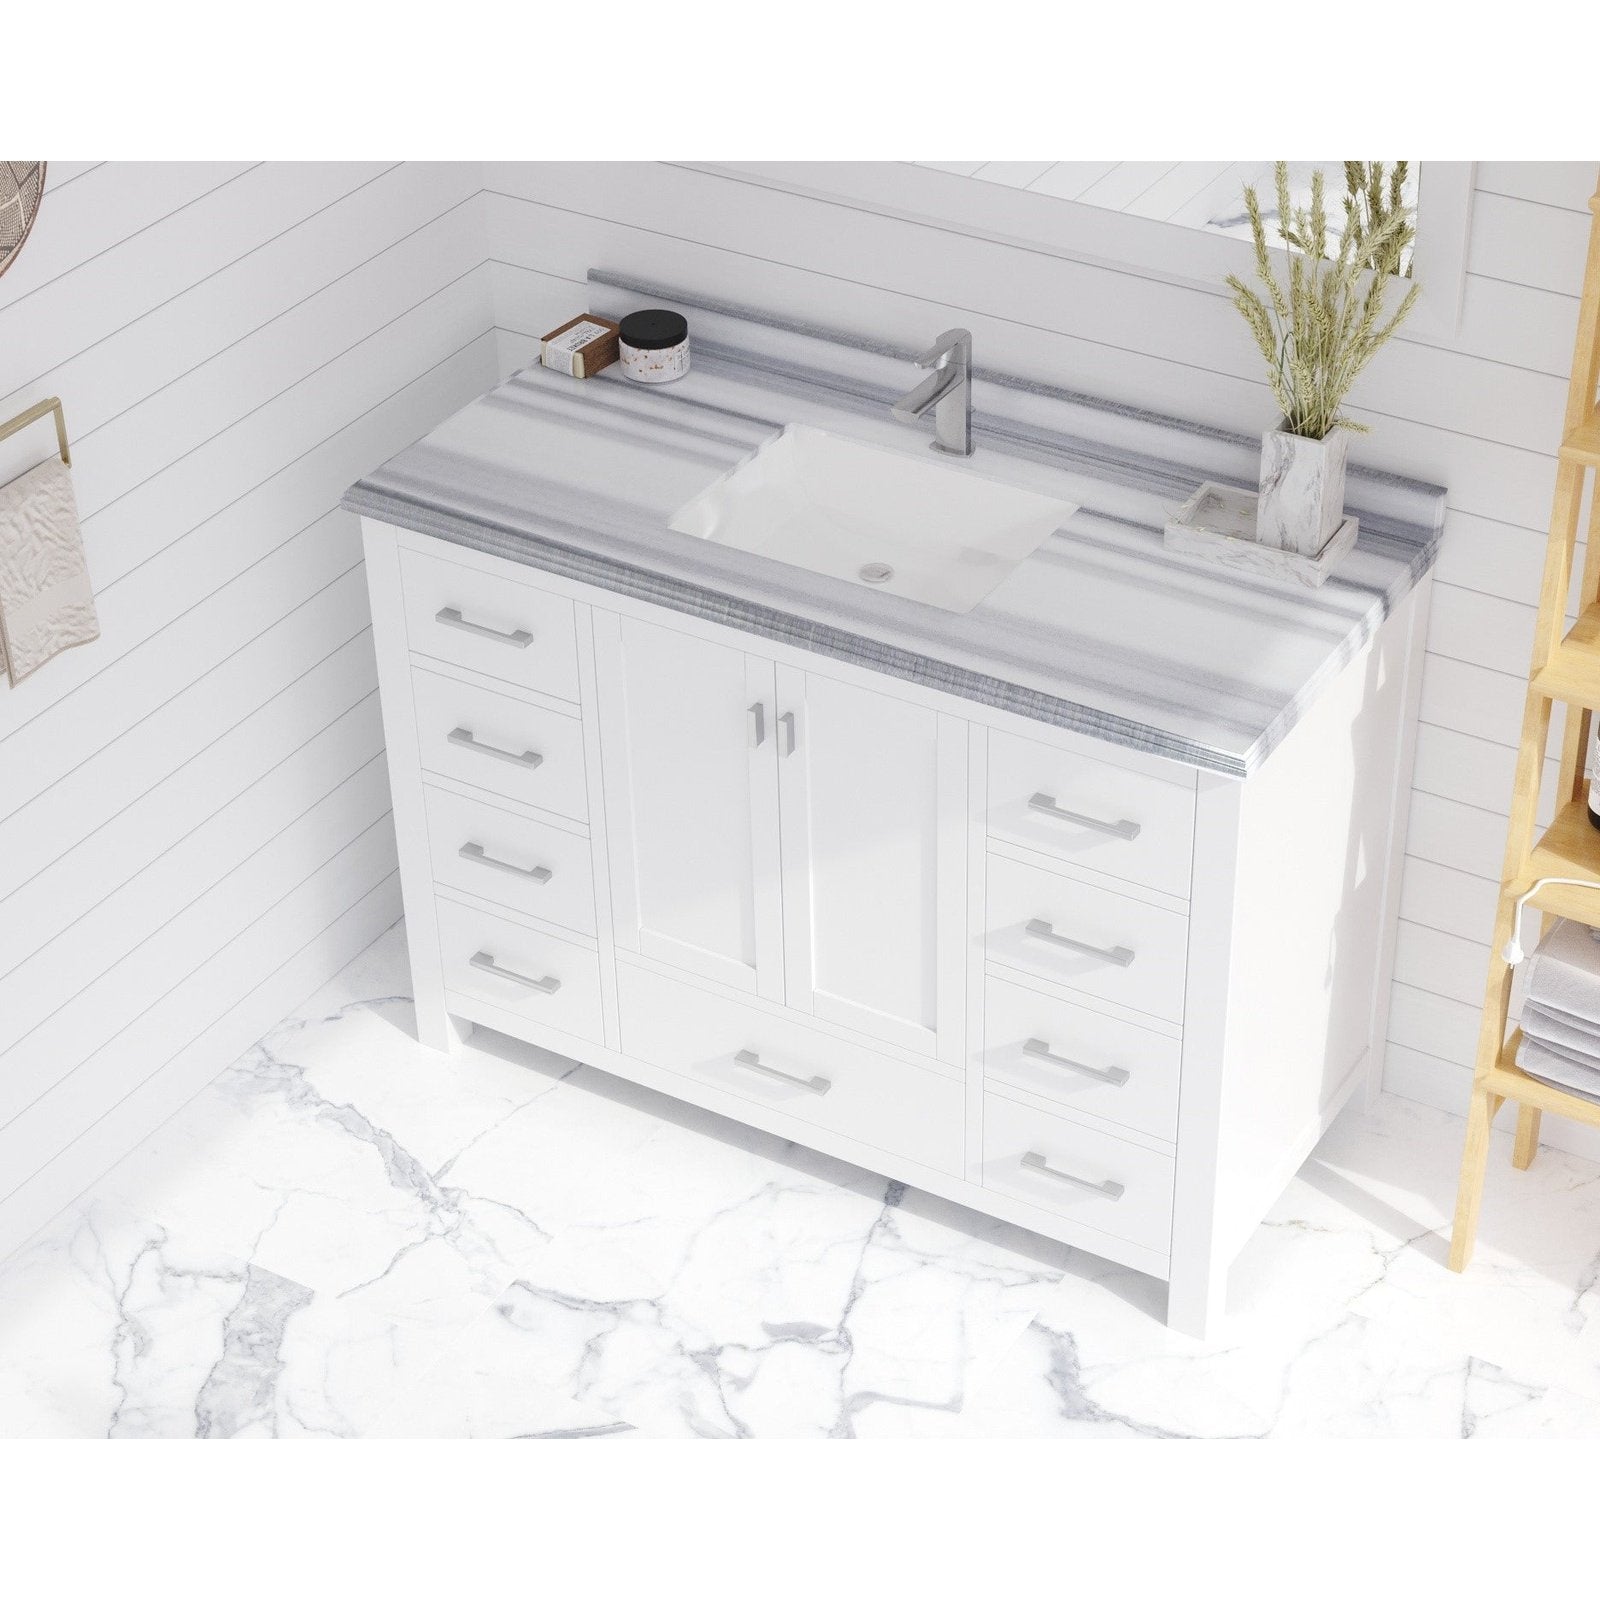 Laviva Forever 48" Single Hole White Stripes Marble Countertop with Rectangular Ceramic Sink 313SQ1H-48-WS